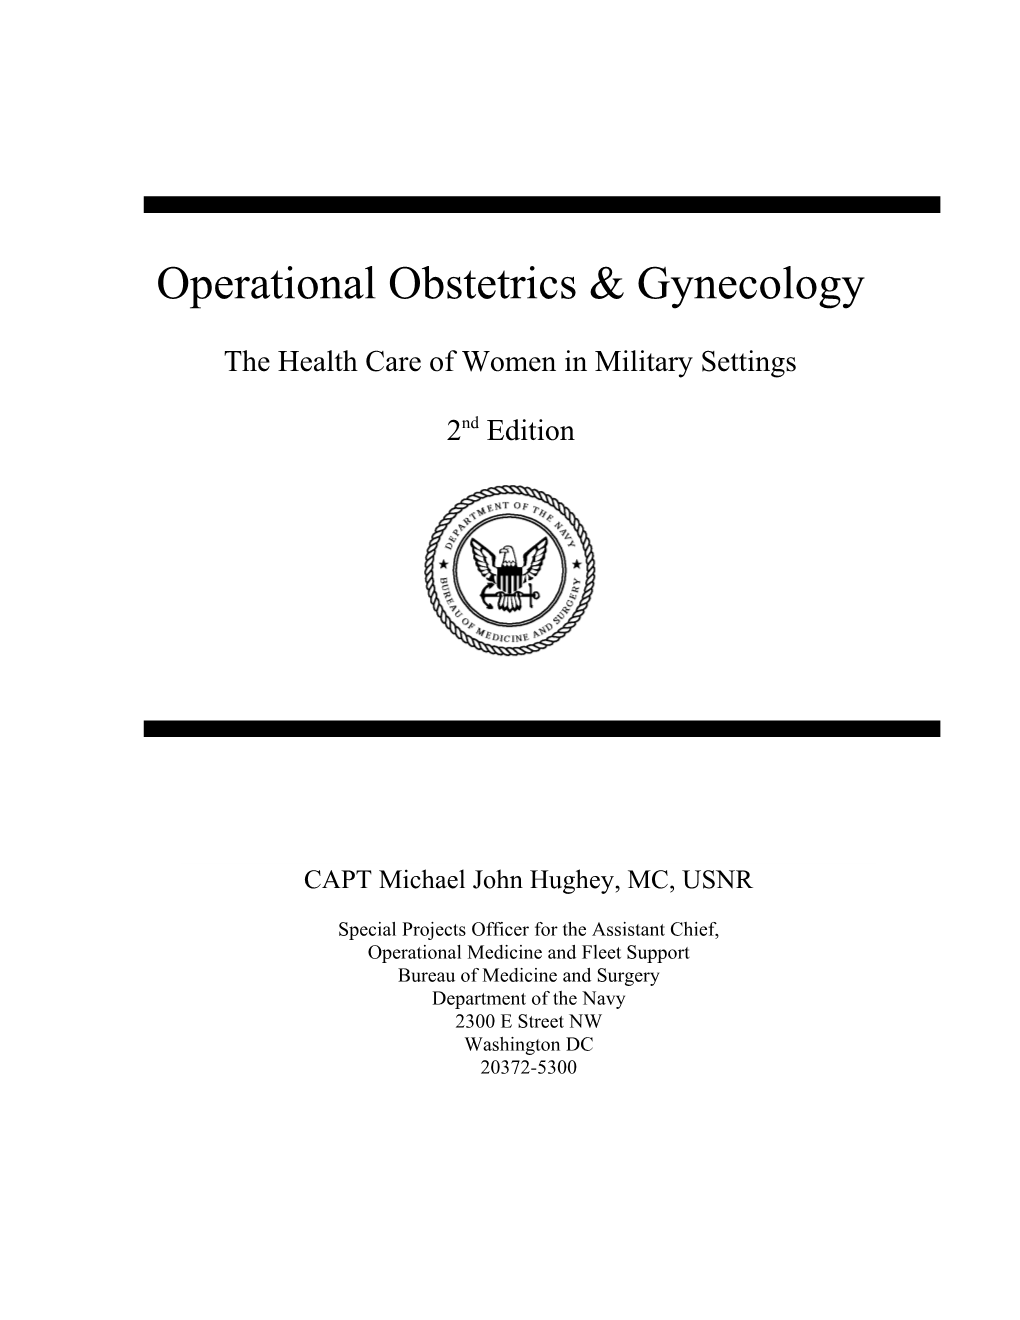 The Health Care of Women in Military Settings